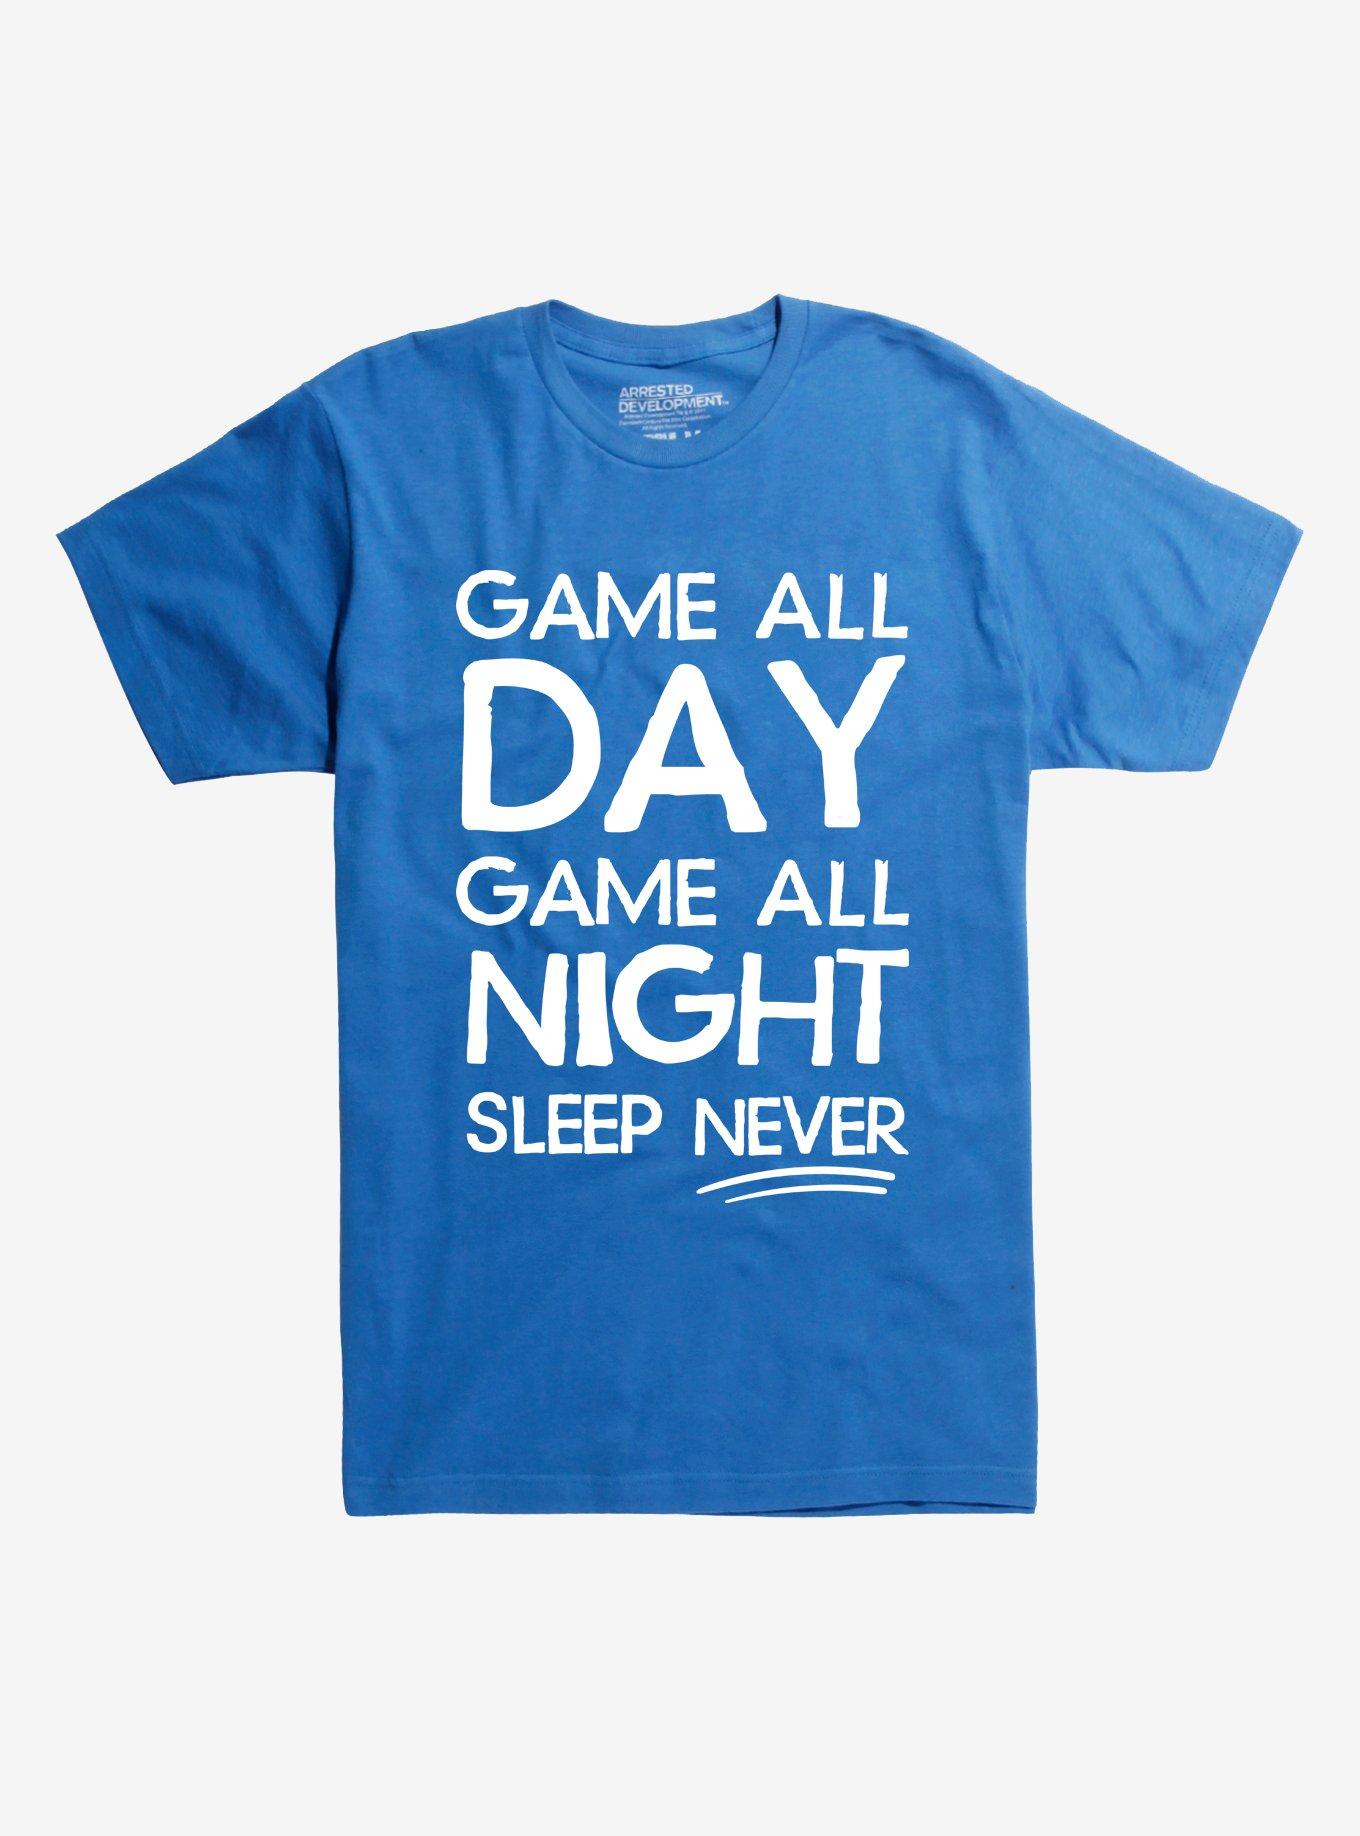 Game All Day And Night T-Shirt, ROYAL BLUE, hi-res